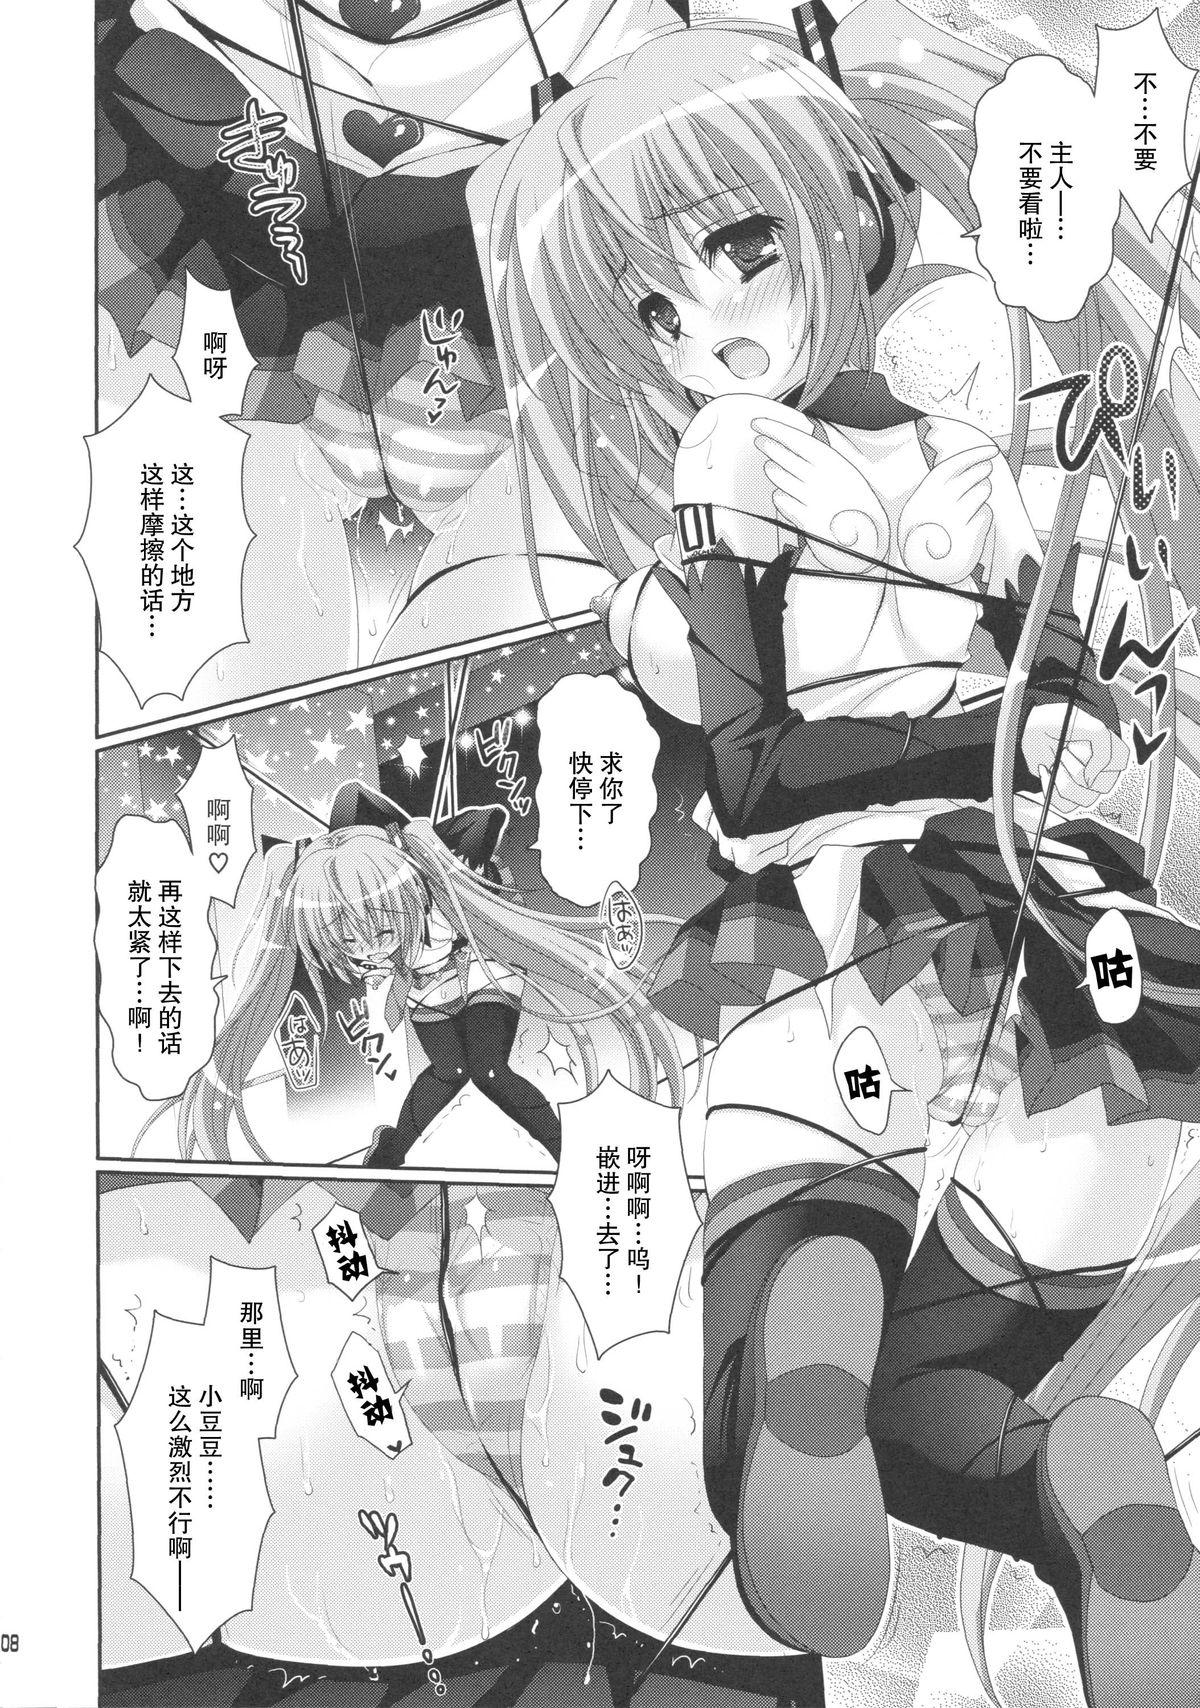 Pene ANGEL ALIVE - Vocaloid Panties - Page 7